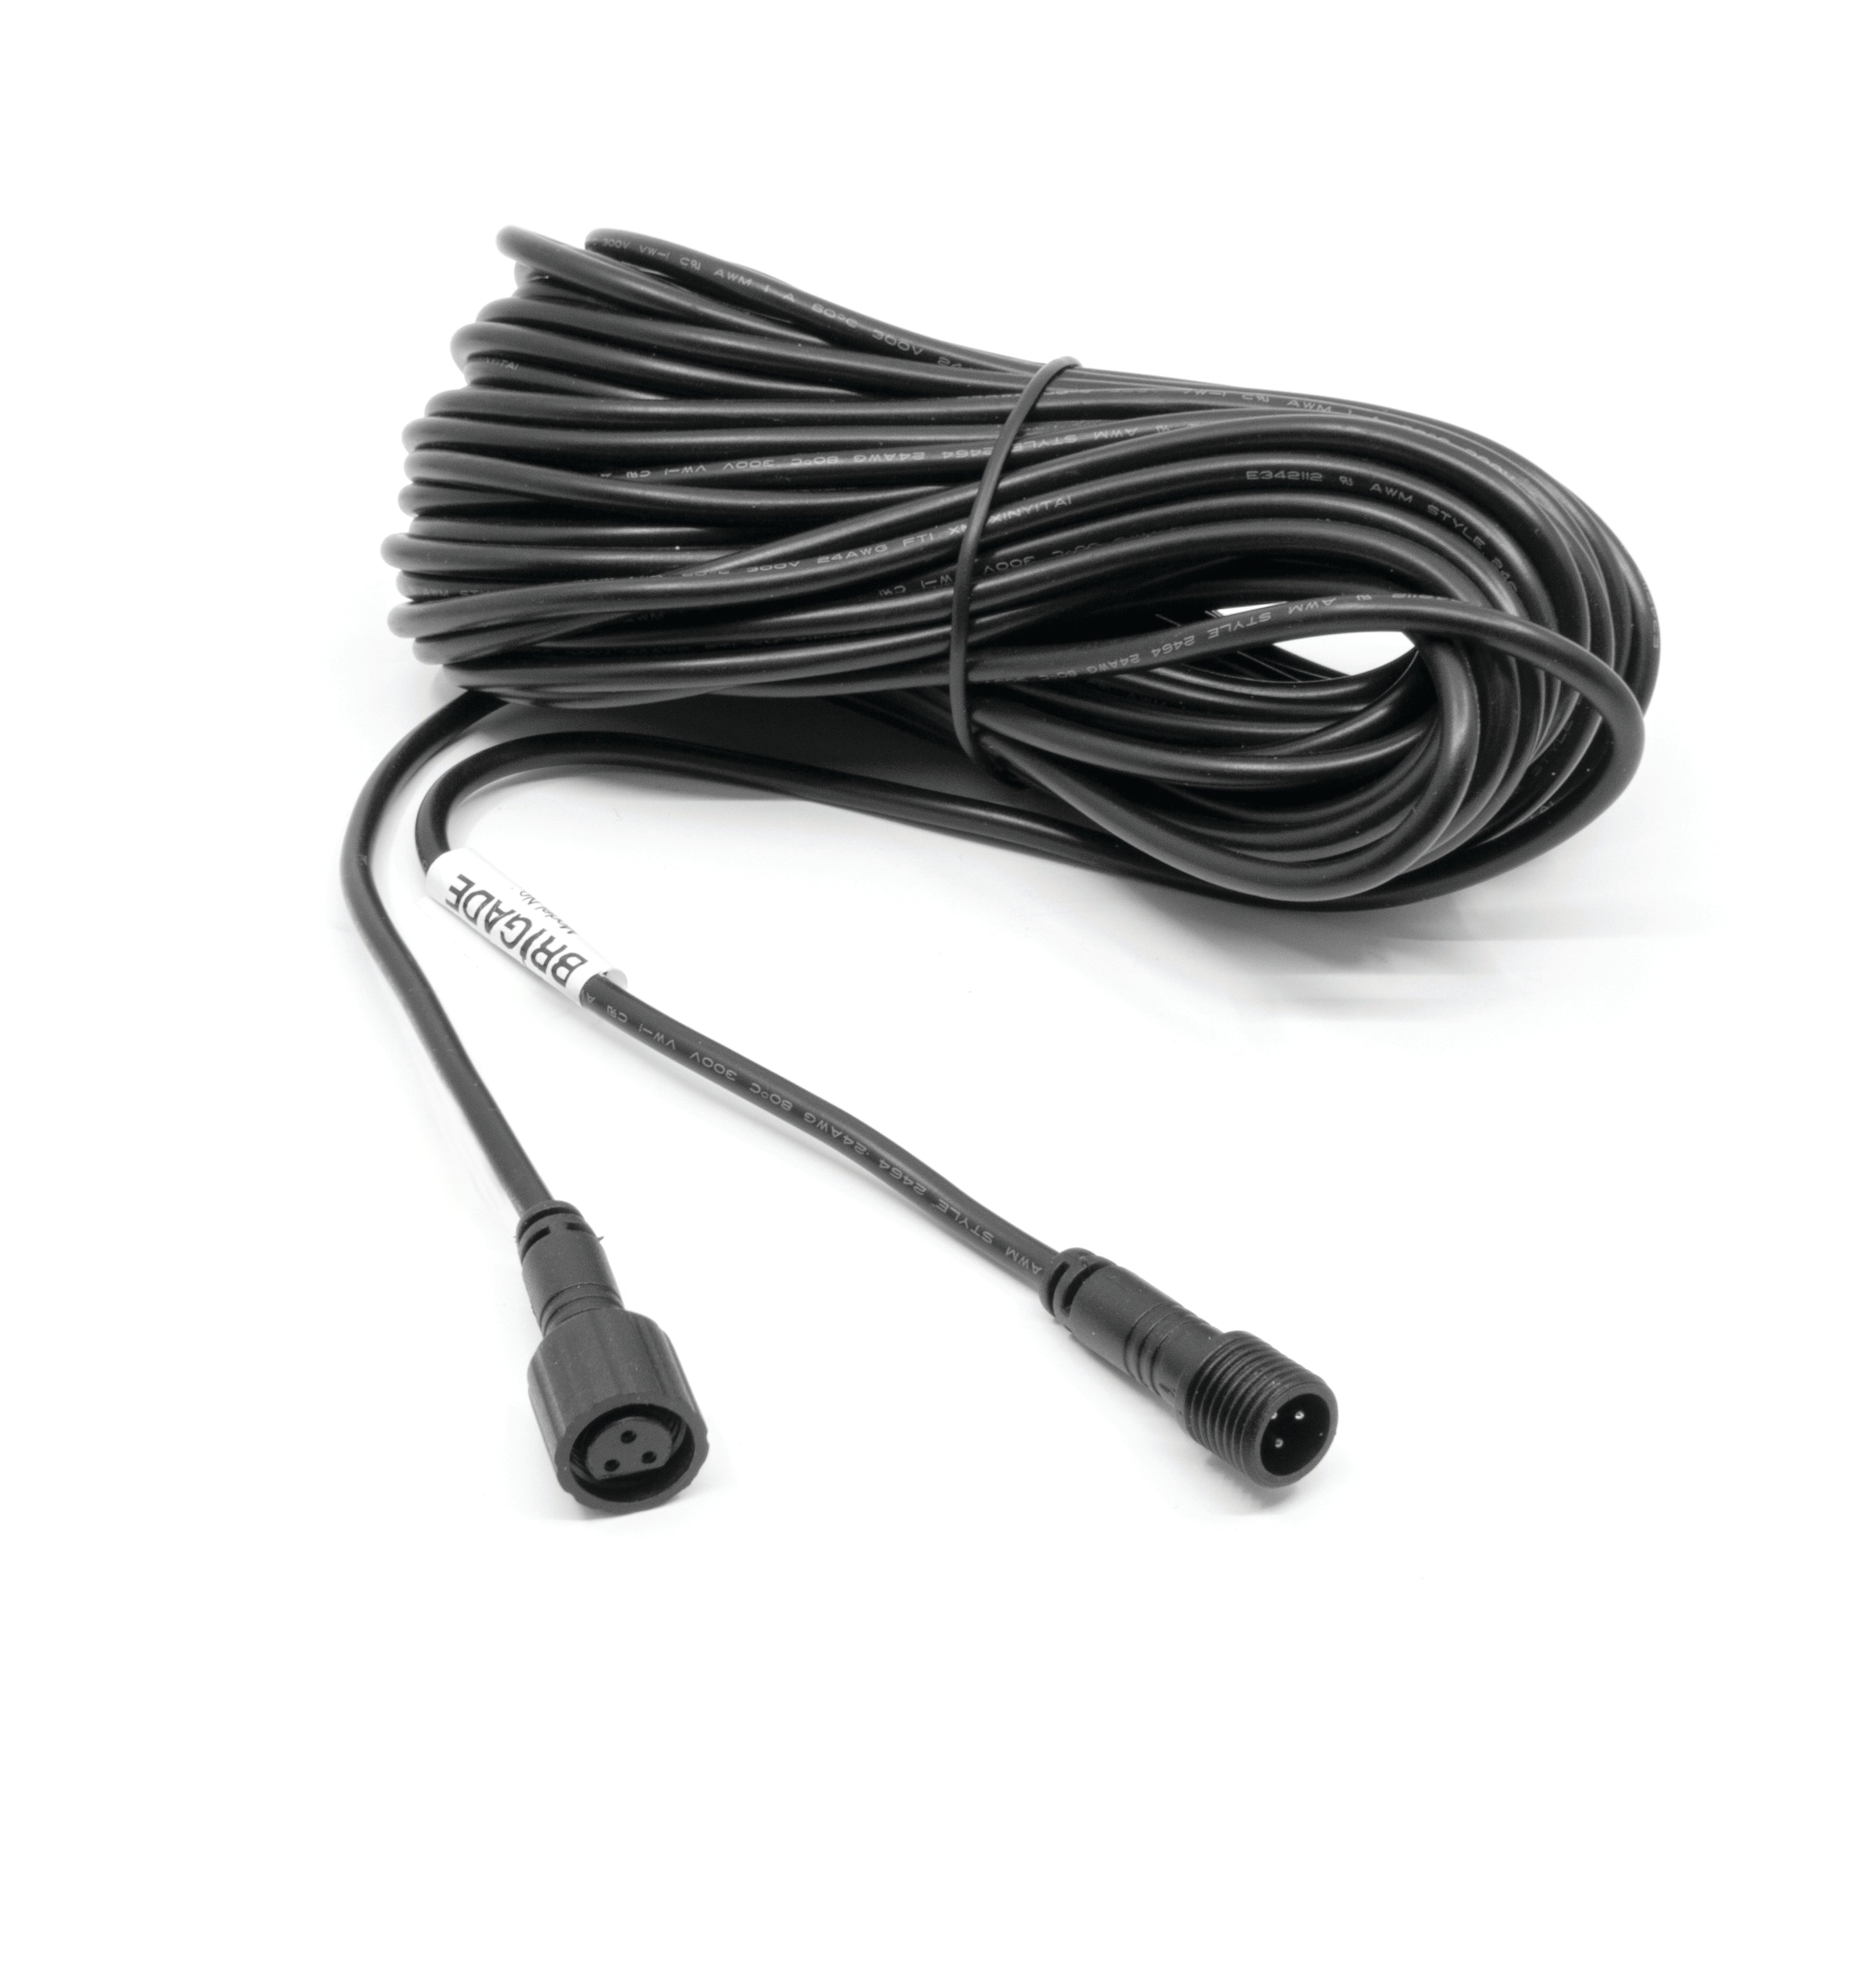 Buzzer/Display extension cable 10 Metre for Ultrasonic detection systems